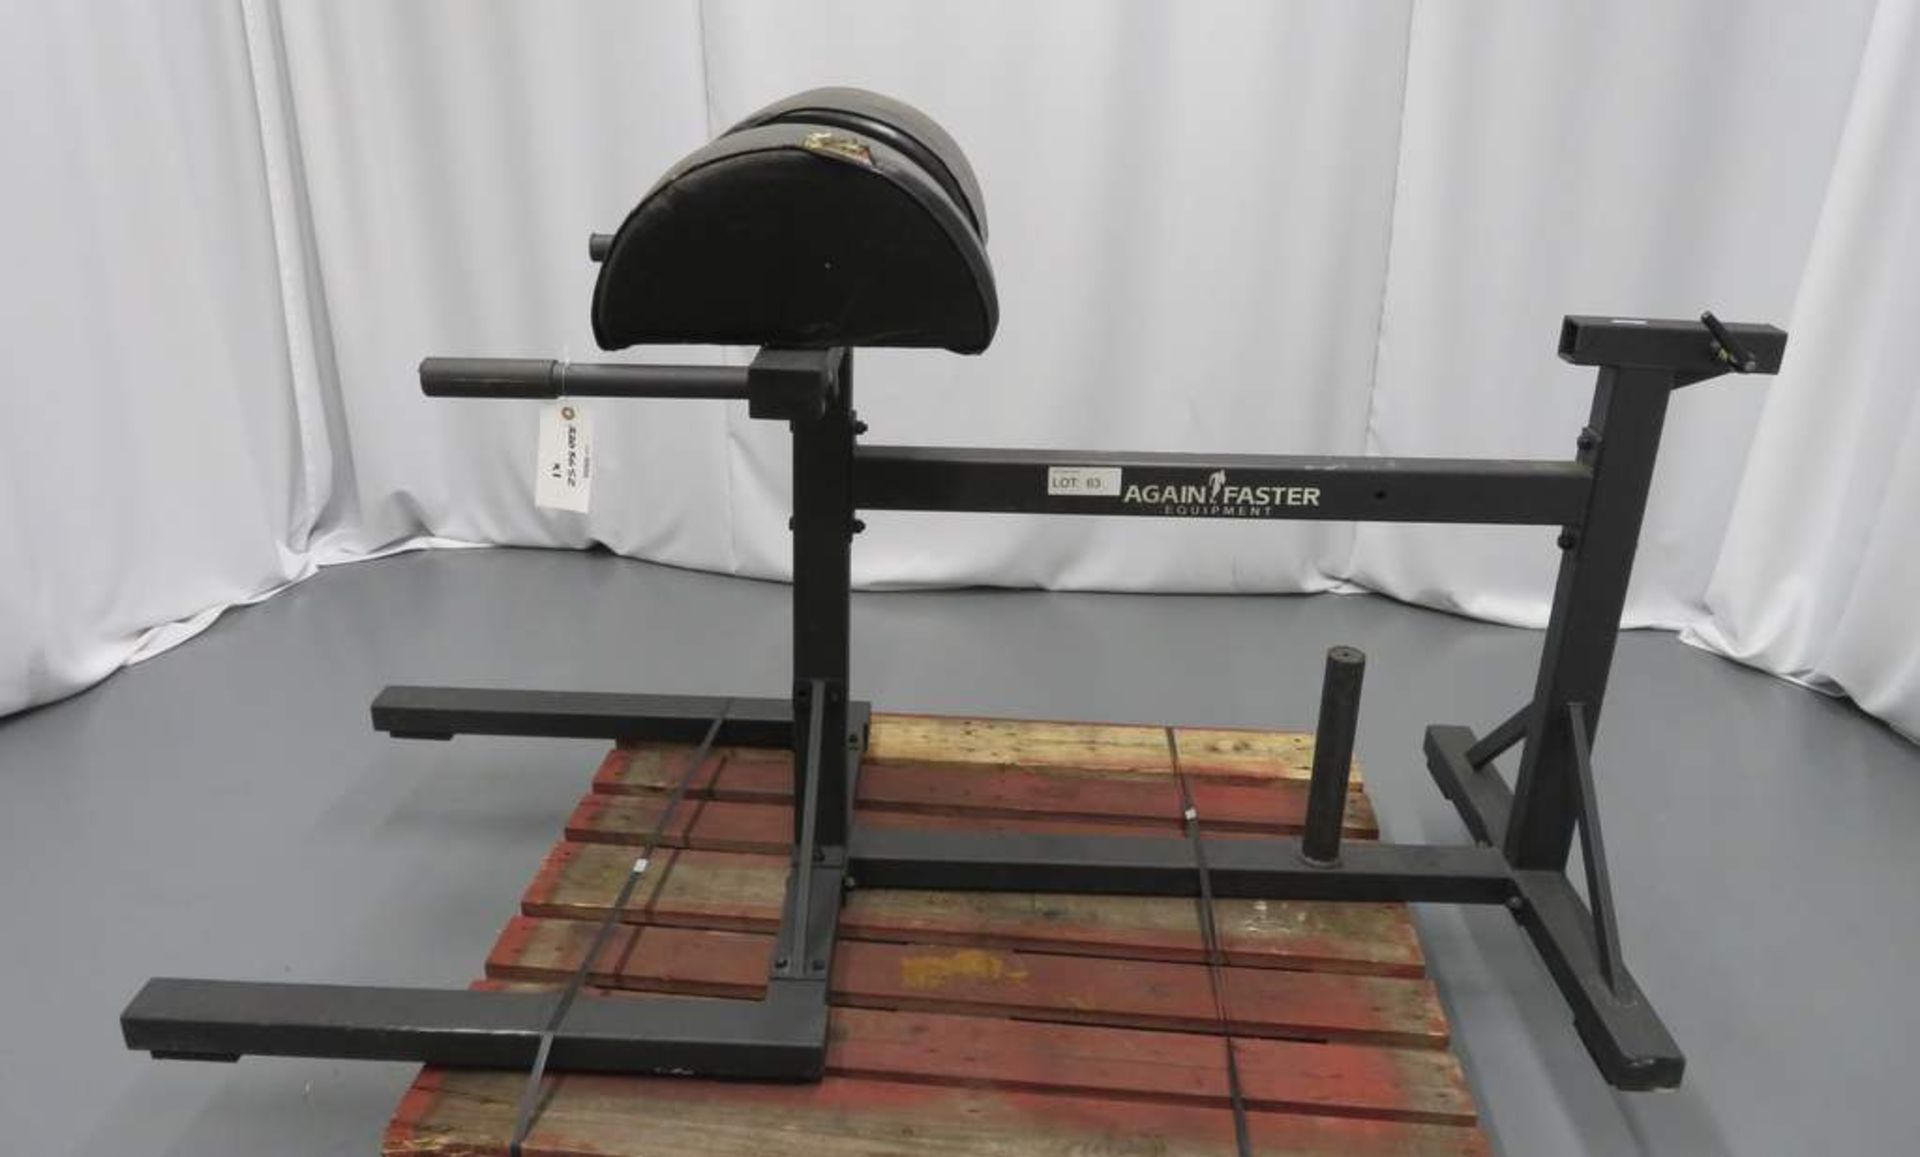 Again Faster Equipment Multi Function Sit Up Station - Missing Leg Support Bar.